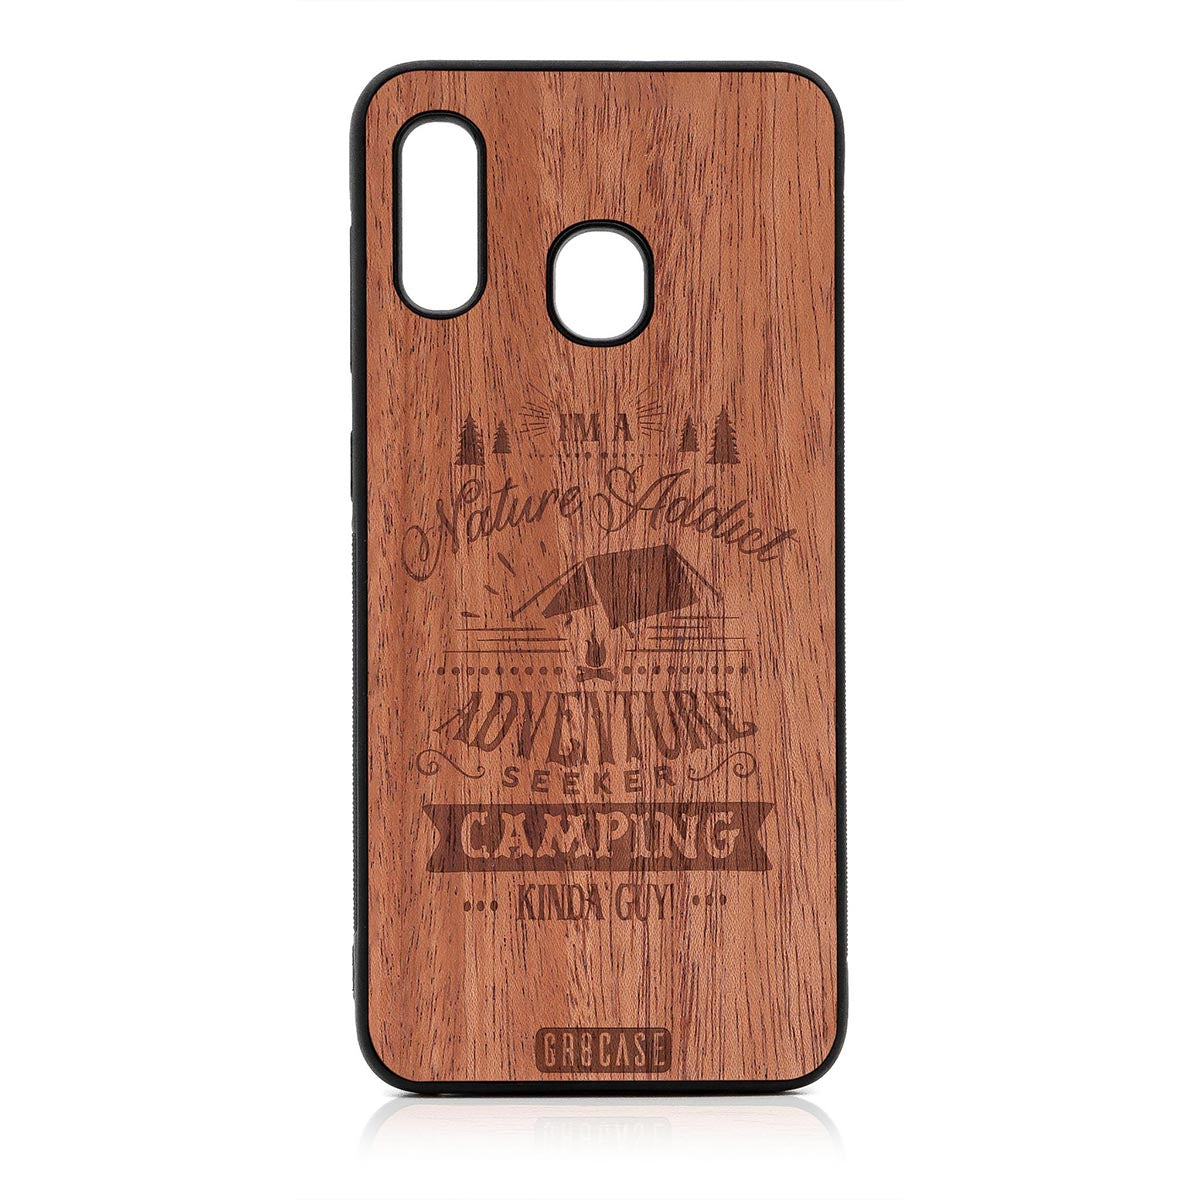 I'm A Nature Addict Adventure Seeker Camping Kinda Guy Design Wood Case For Samsung Galaxy A20 by GR8CASE